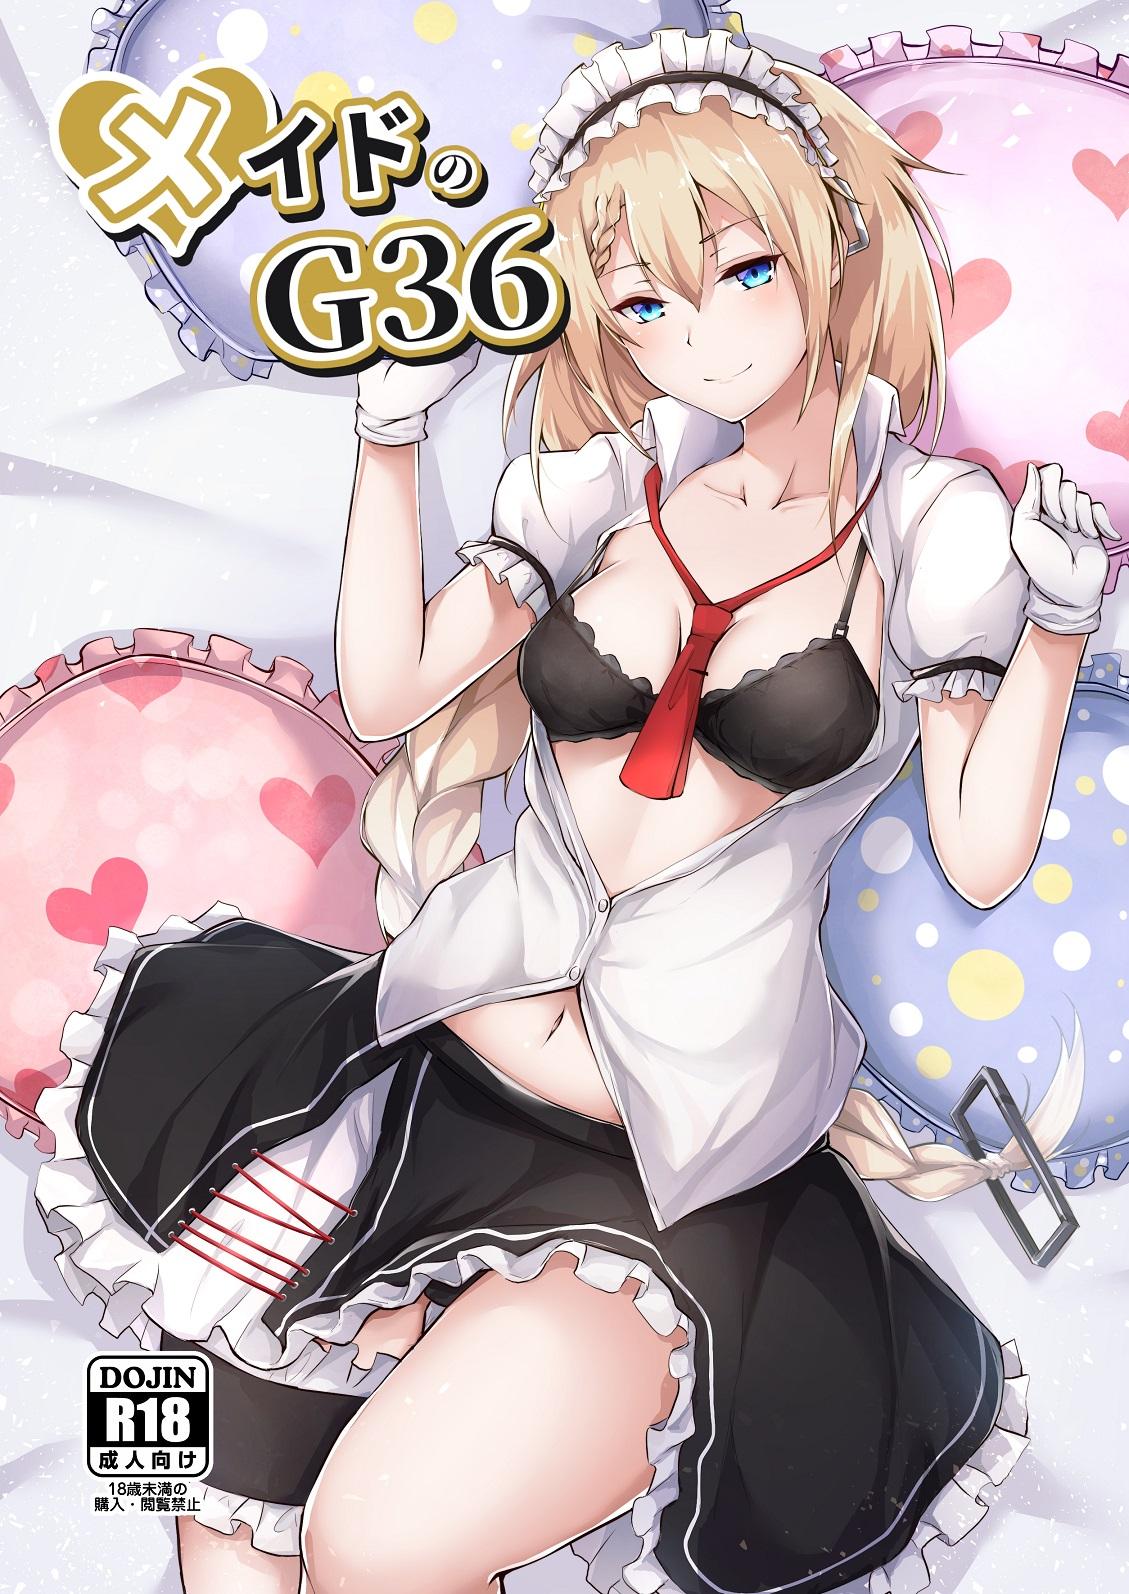 Hymen Maid no G36 - Girls frontline Nylons - Picture 1